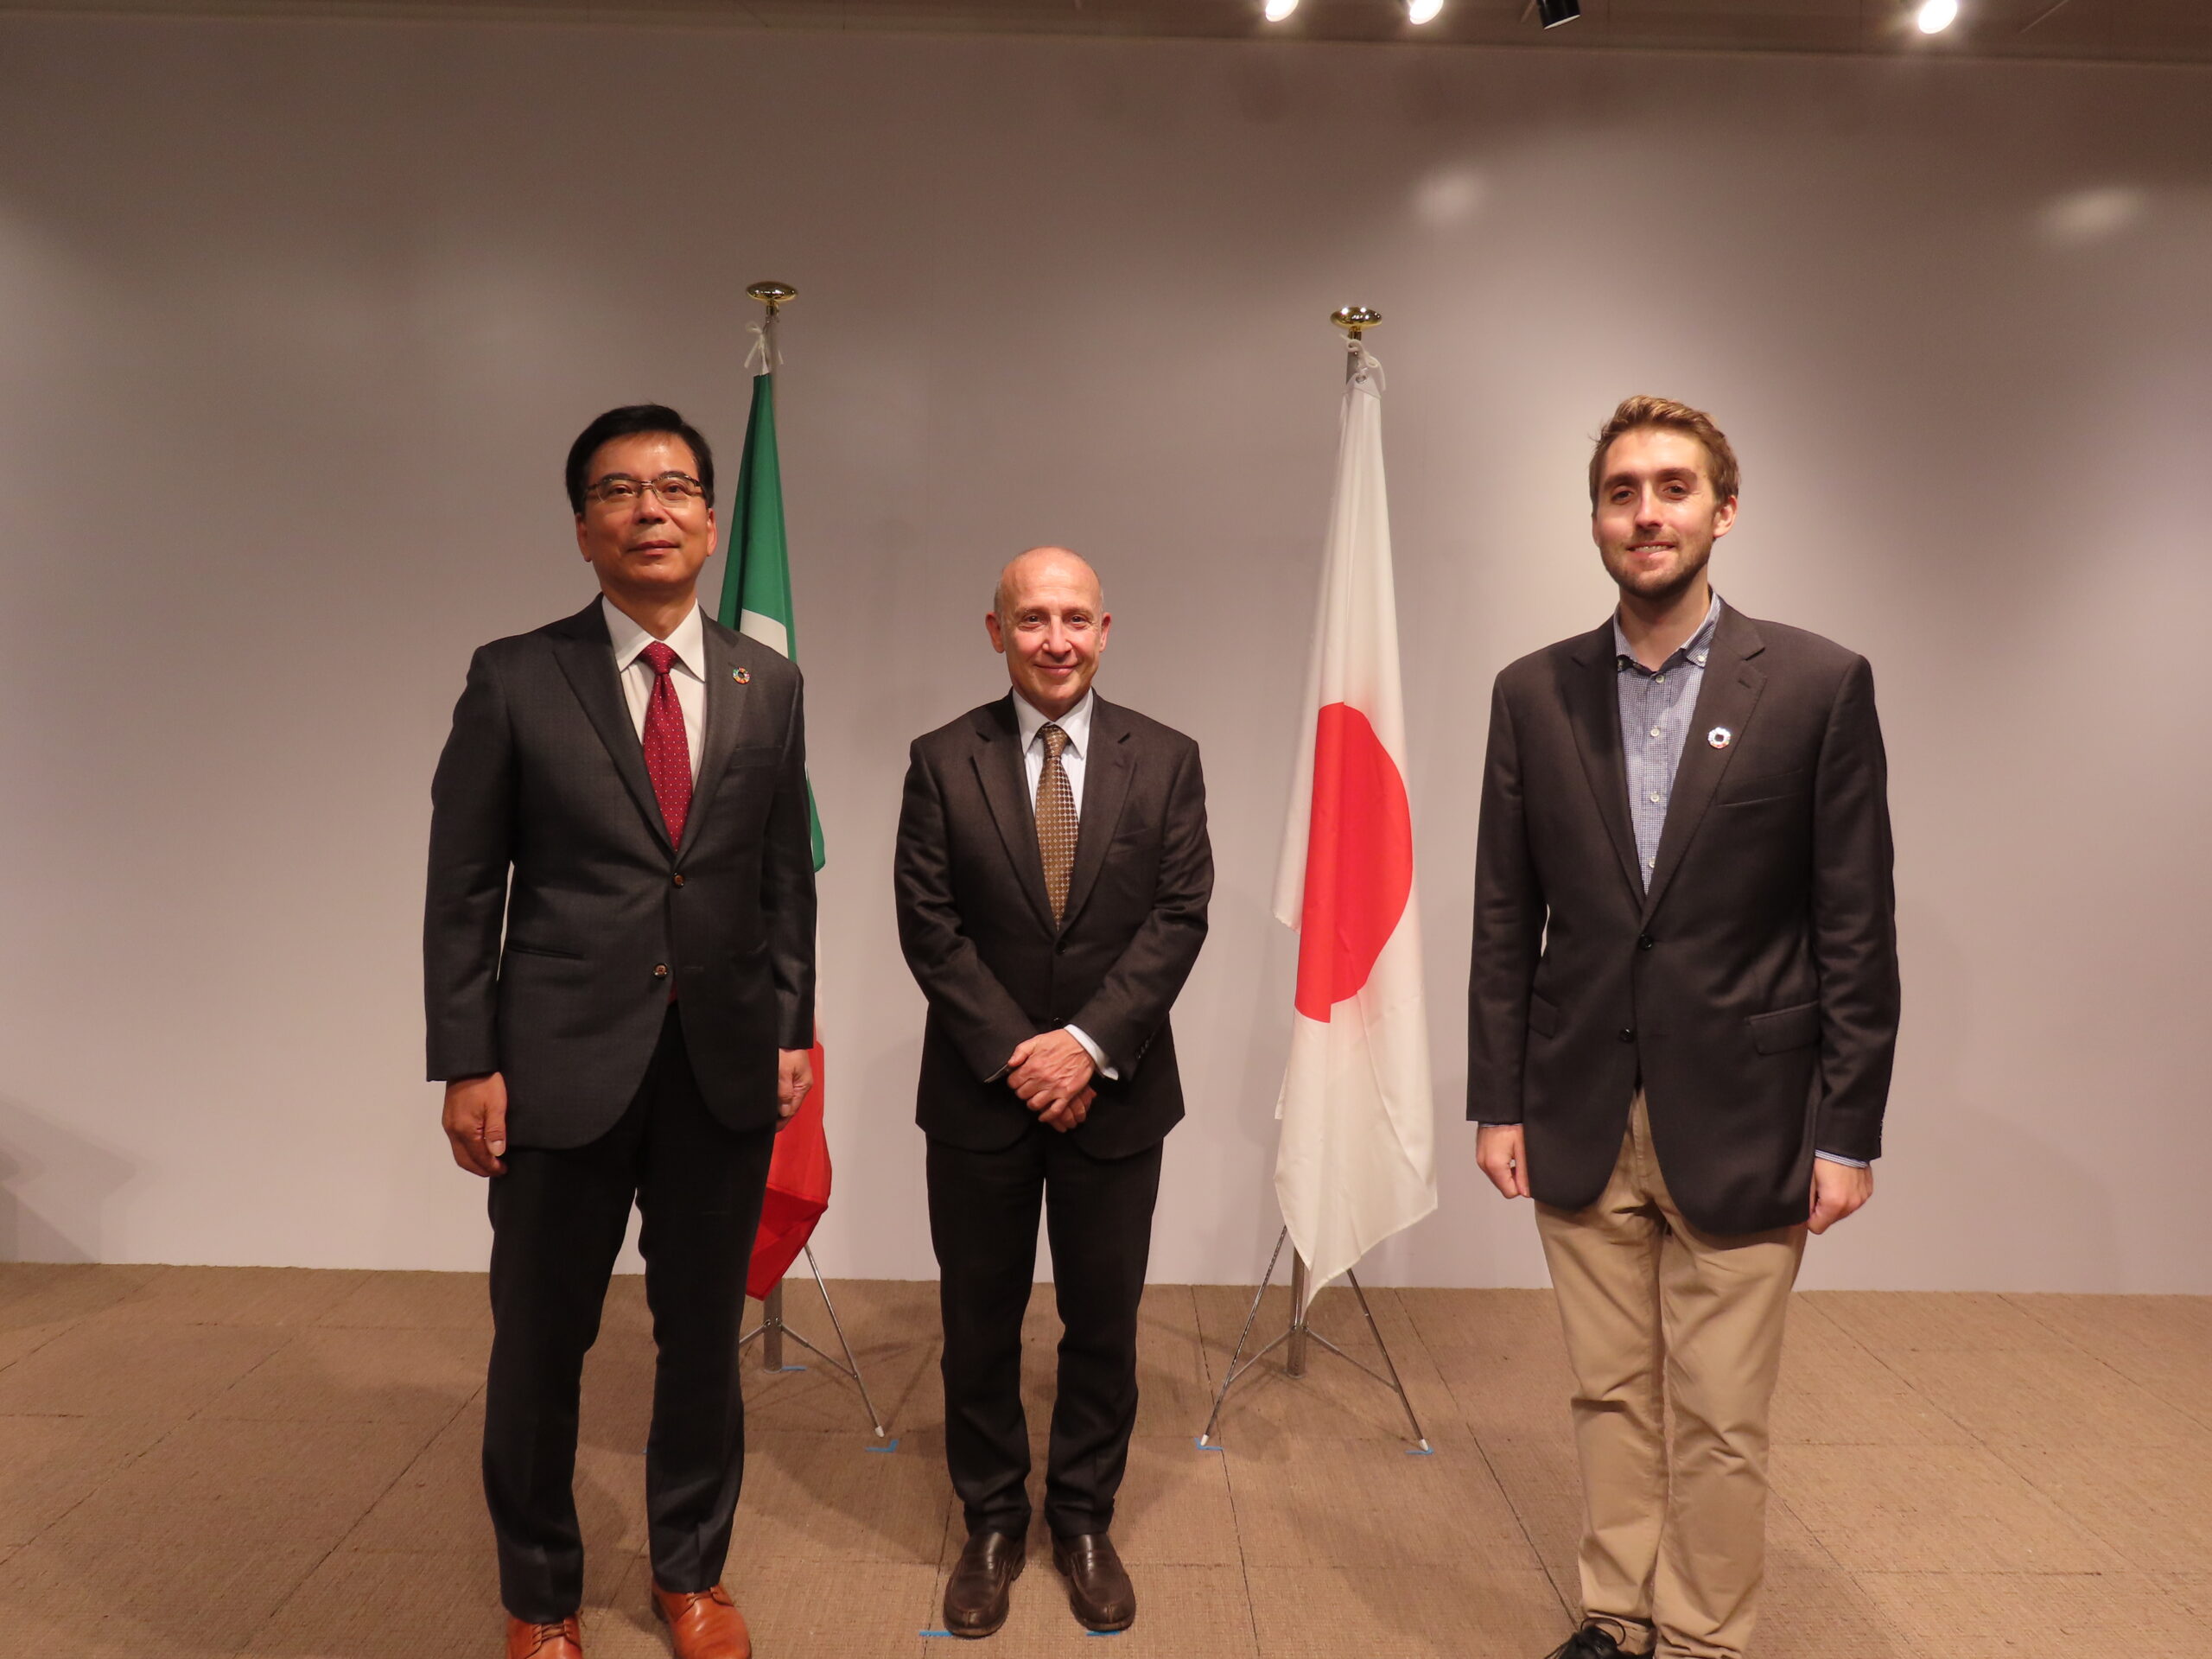 Future Food Institute's agrifood innovation hub opens in Tokyo in collaboration with Tokyo Tatemono